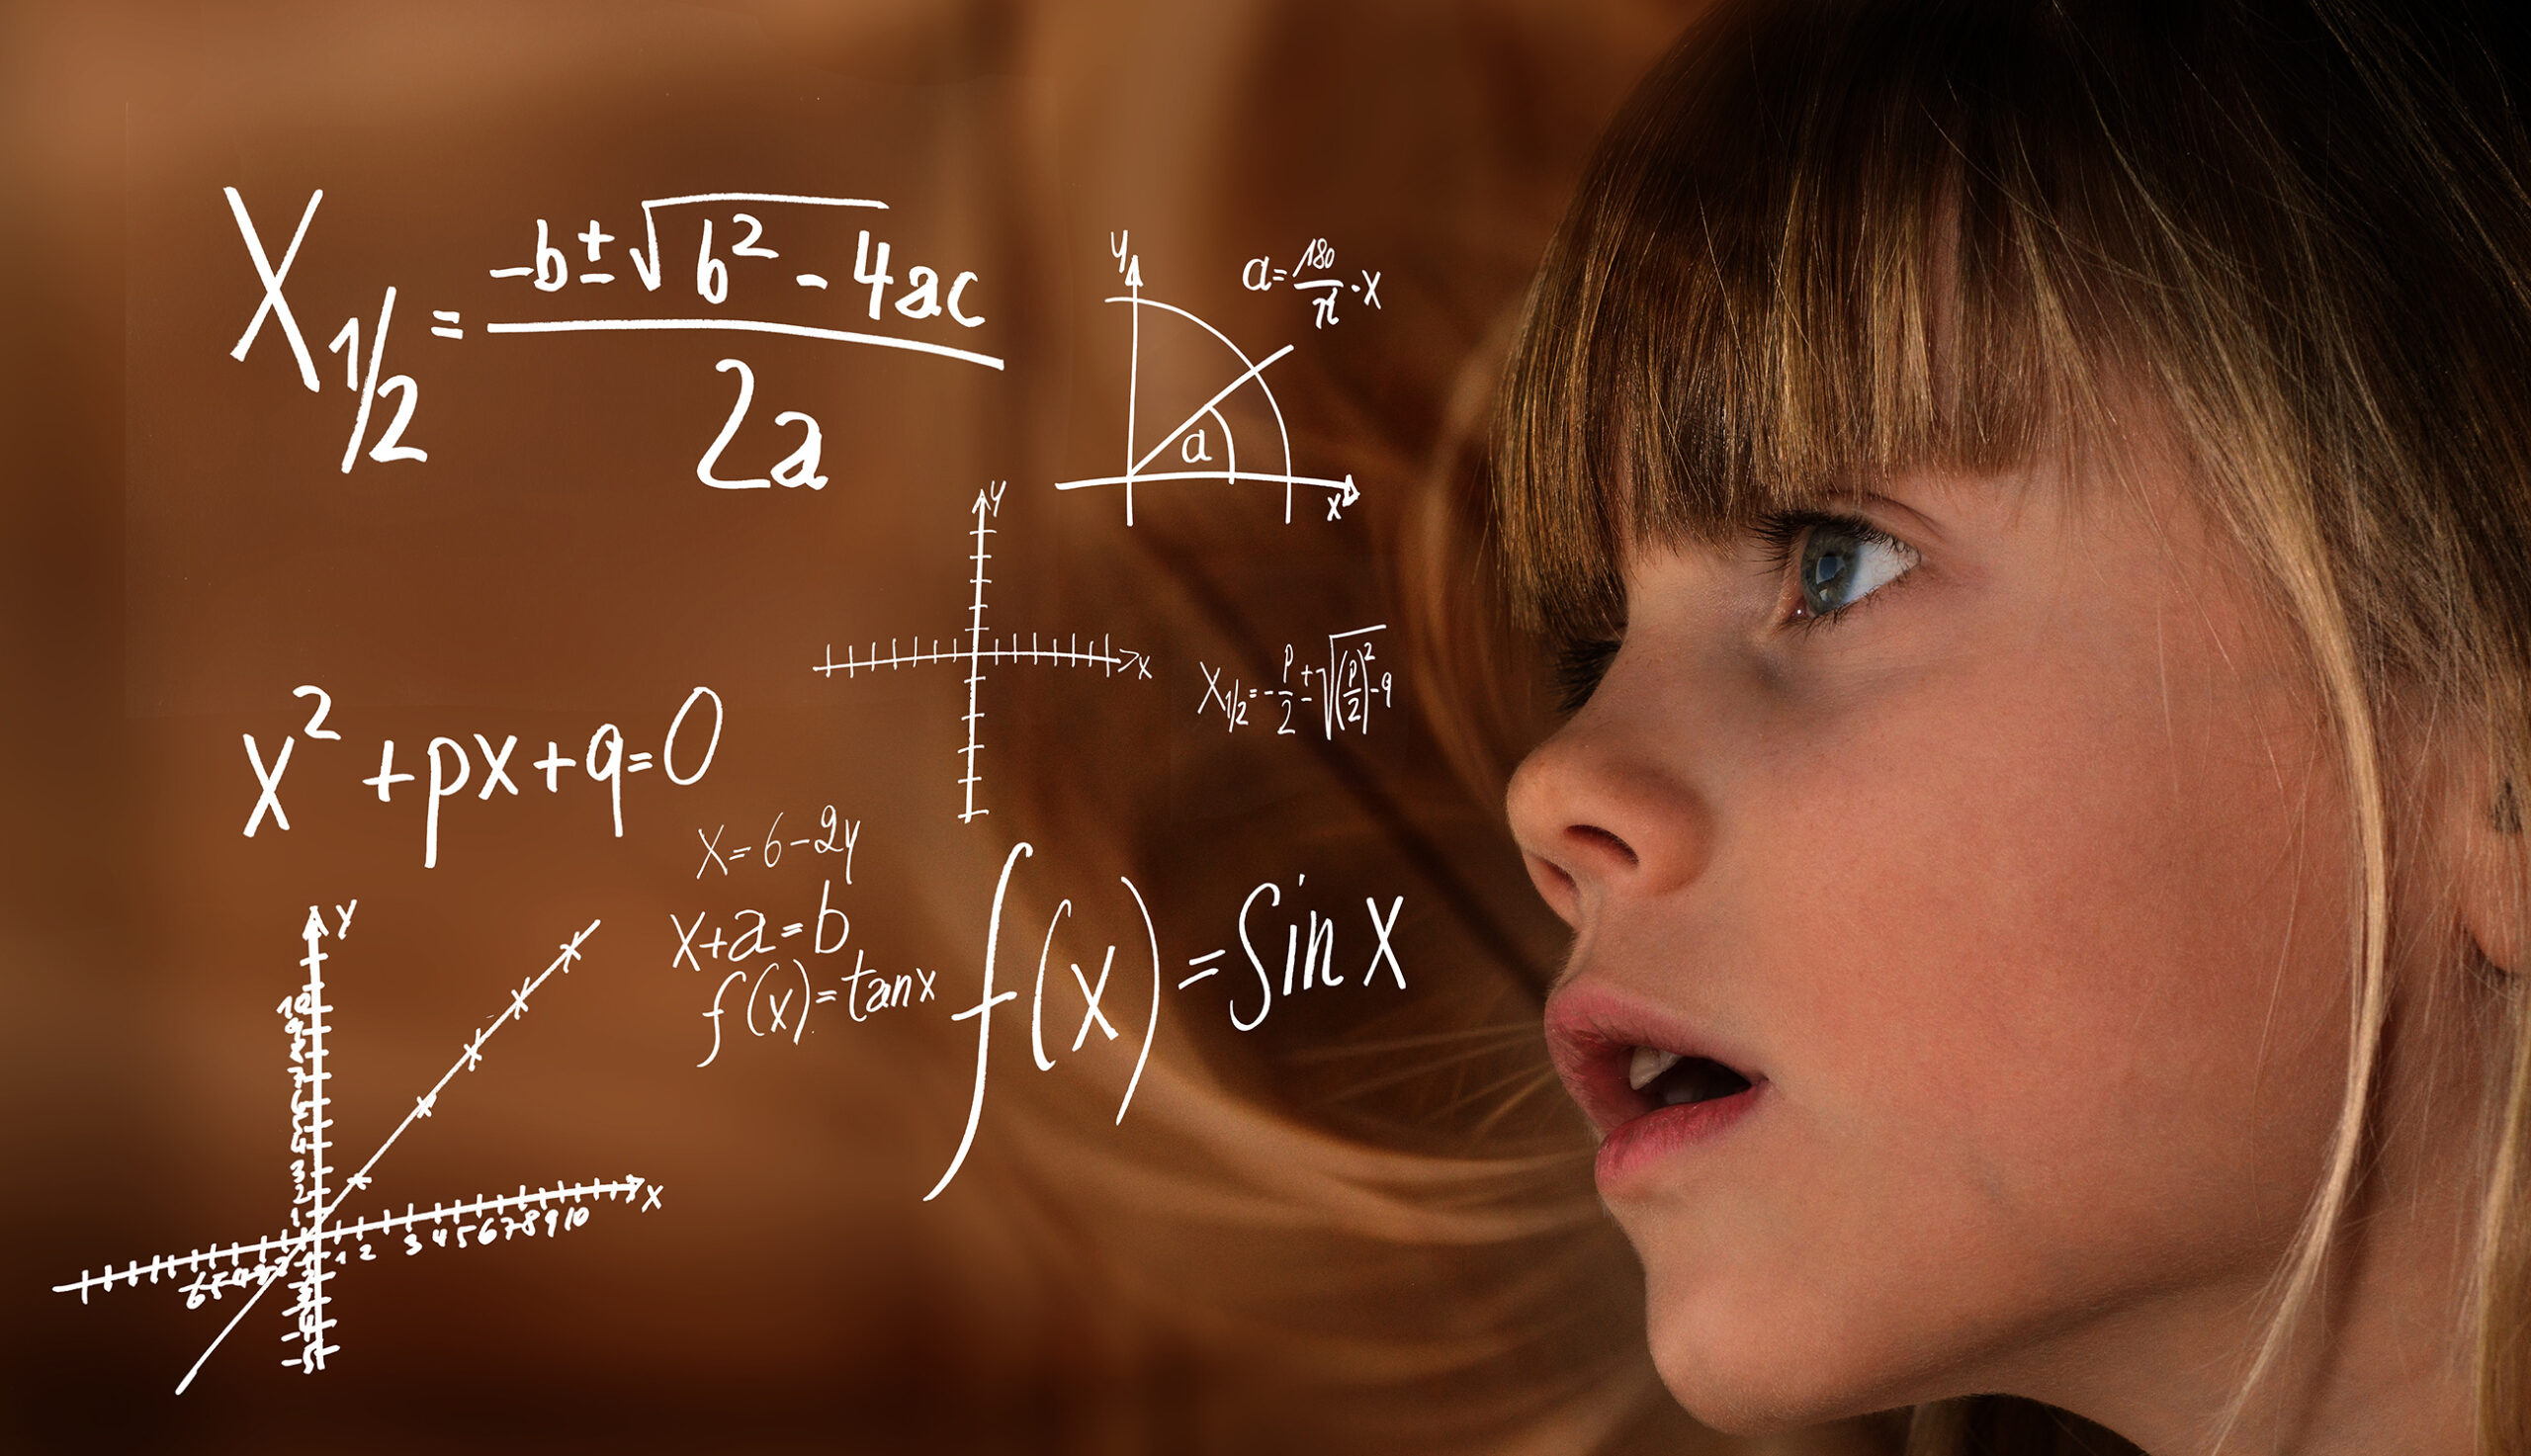 A young girl marvels at a grouping of mathematical problems and formulas displayed on a neutral tan background